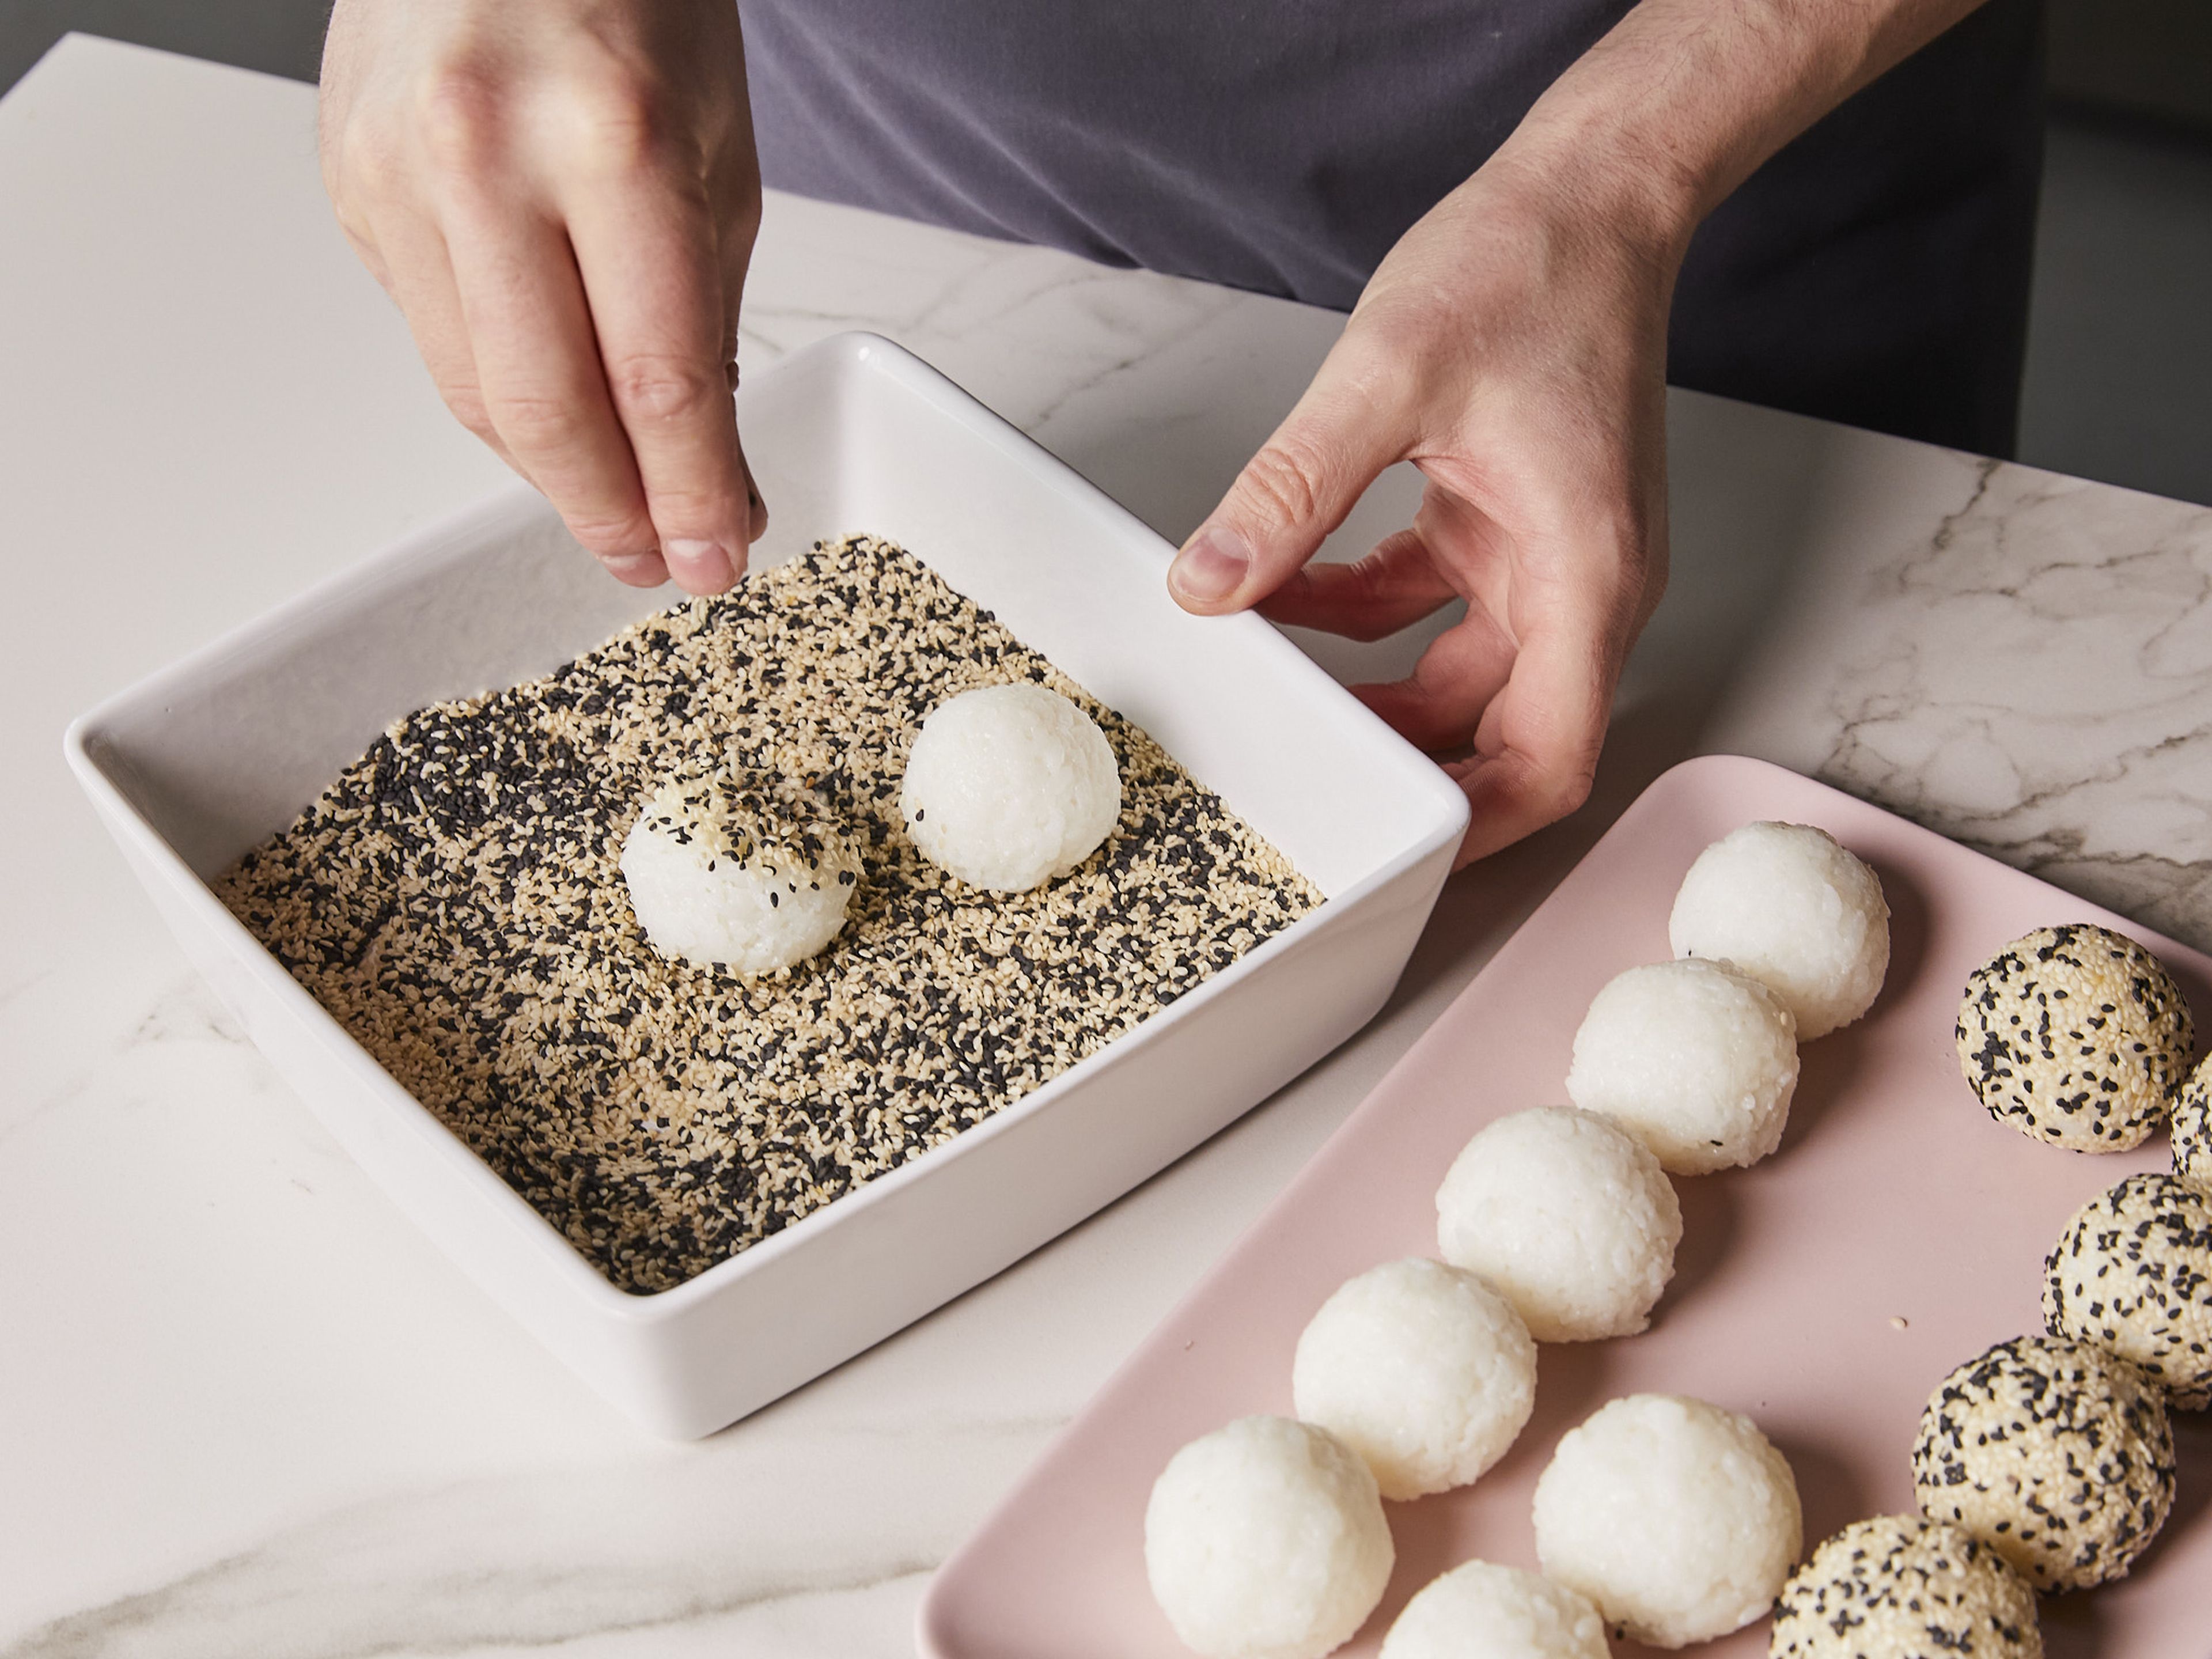 Put the sesame seeds on a flat plate and roll the finished balls around to coat them. Cut the scallion into fine rings. Arrange sushi balls on a plate and garnish with mayonnaise, teriyaki sauce and spring onion rings as desired. Serve with soy sauce and wasabi.